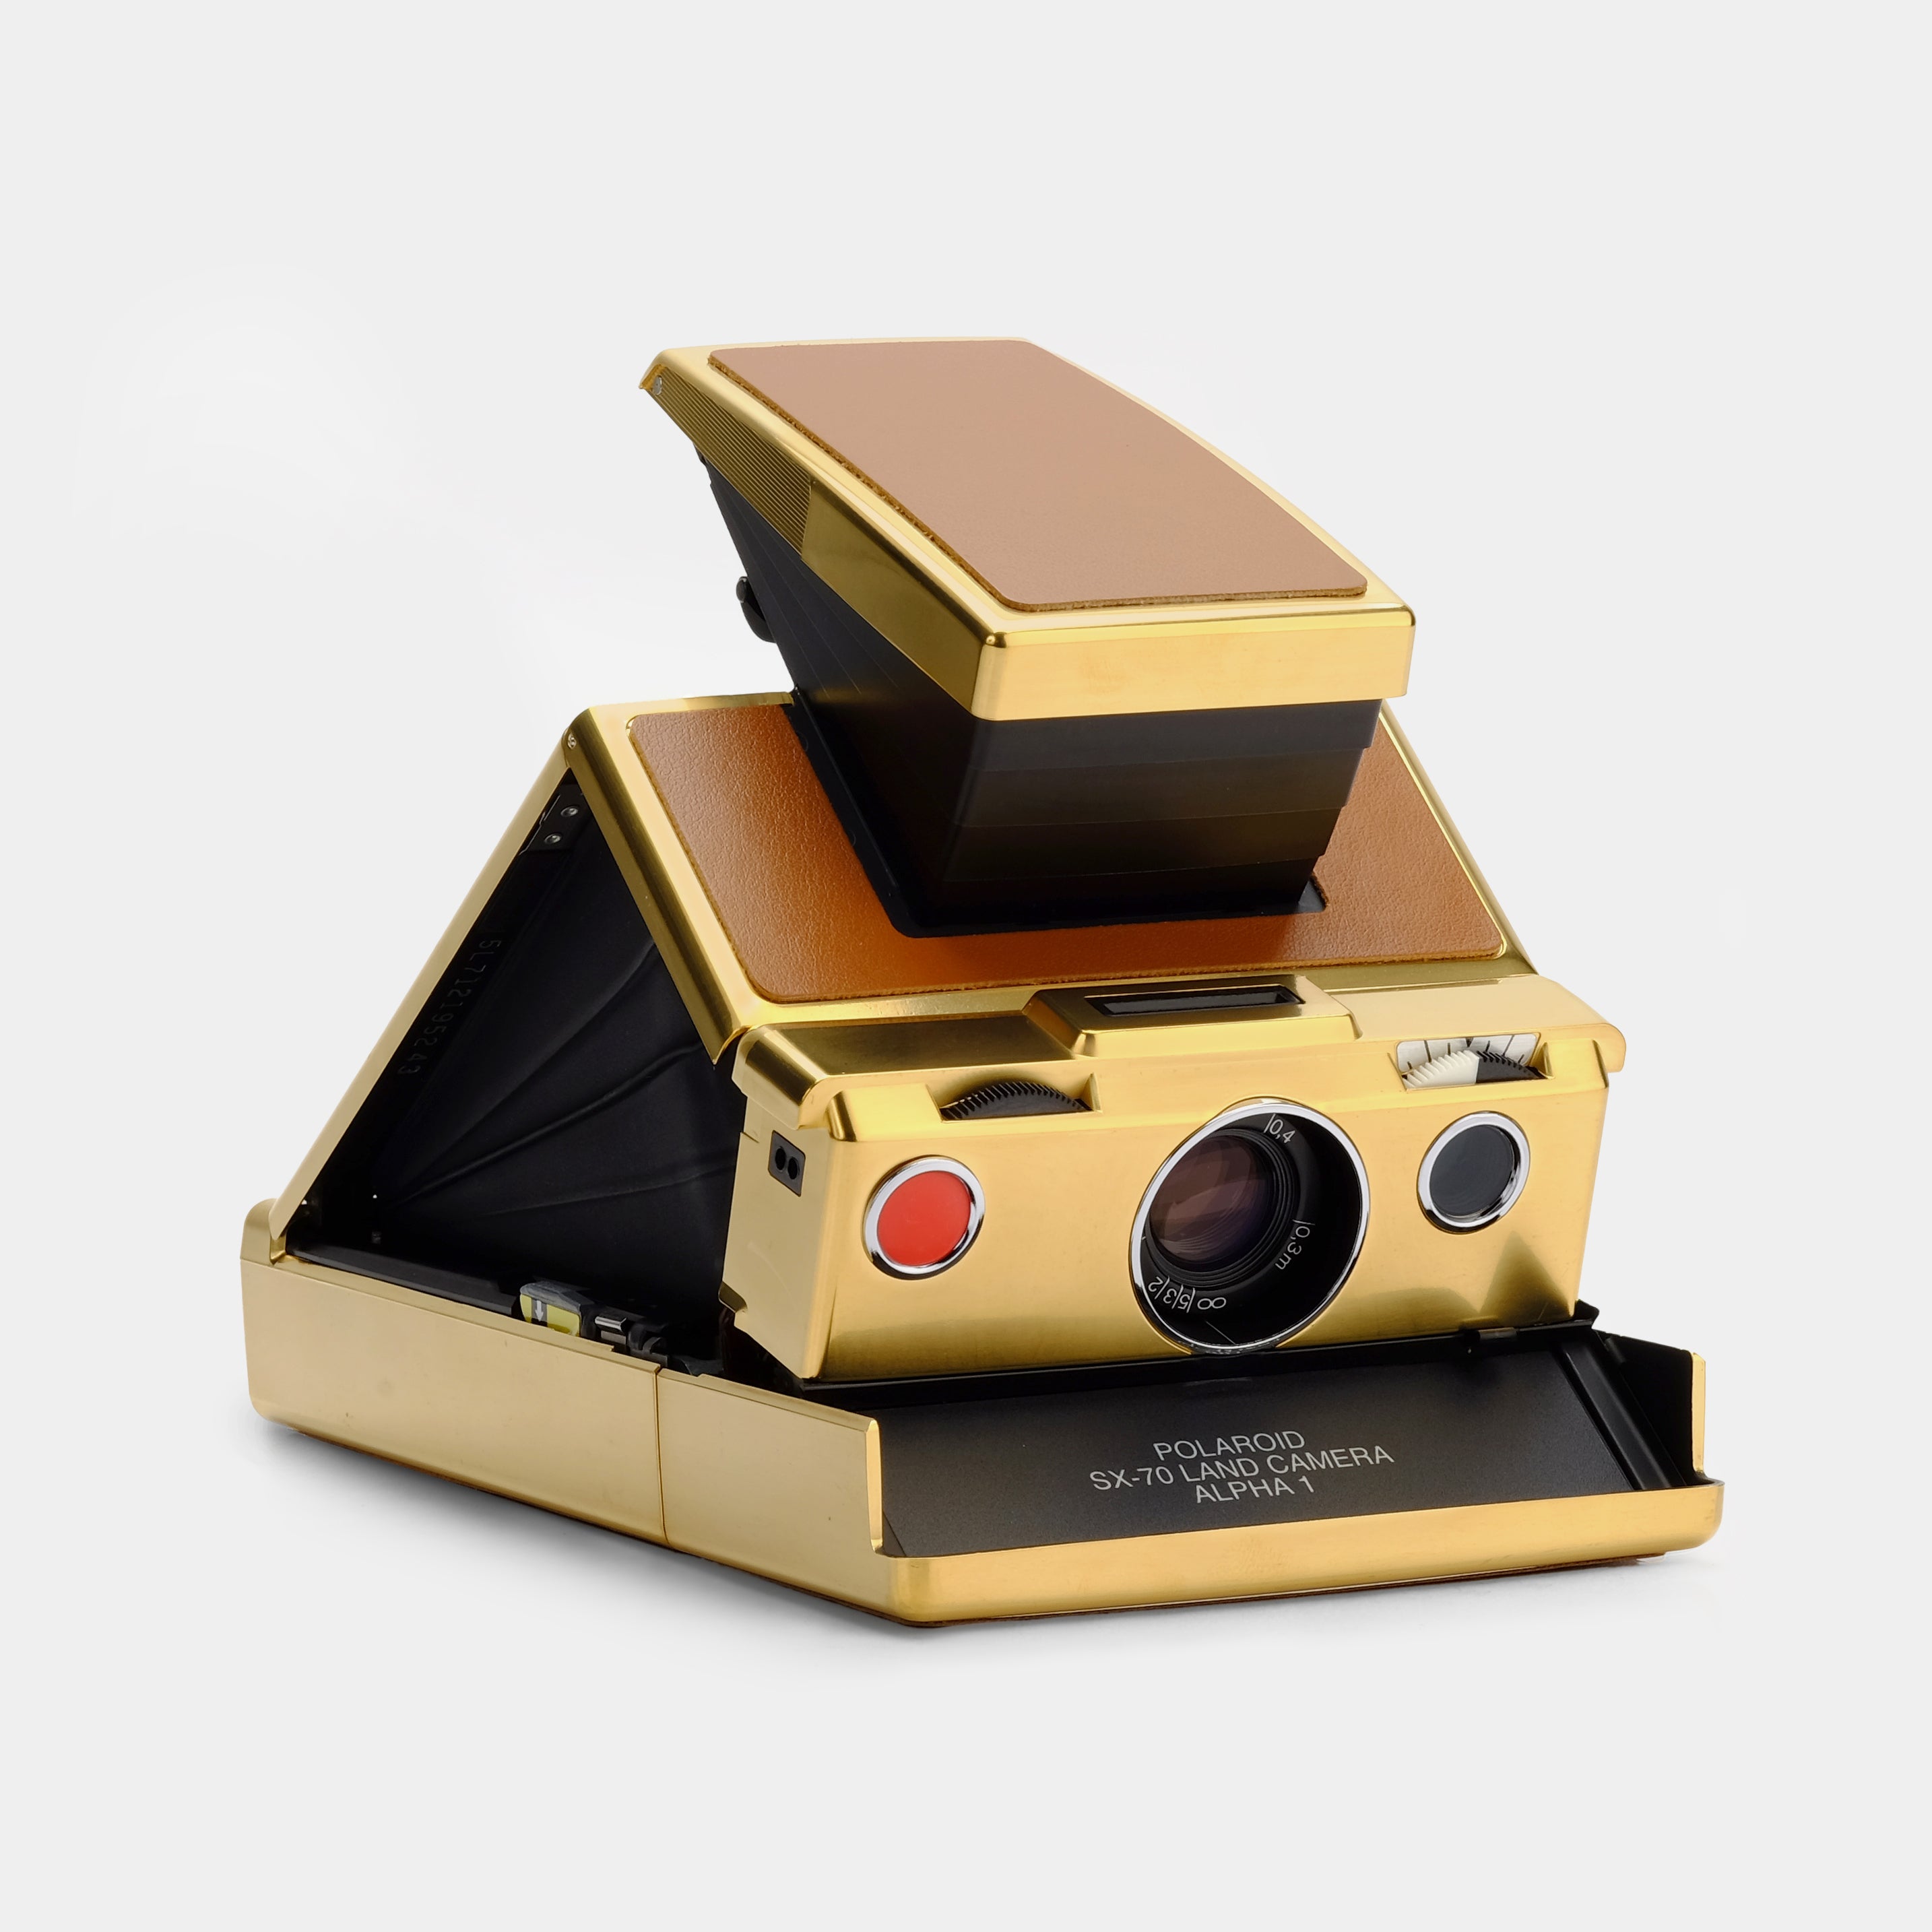 Polaroid SX-70 Alpha Gold Plated Tan Leather Limited Edition Folding Instant Film Camera